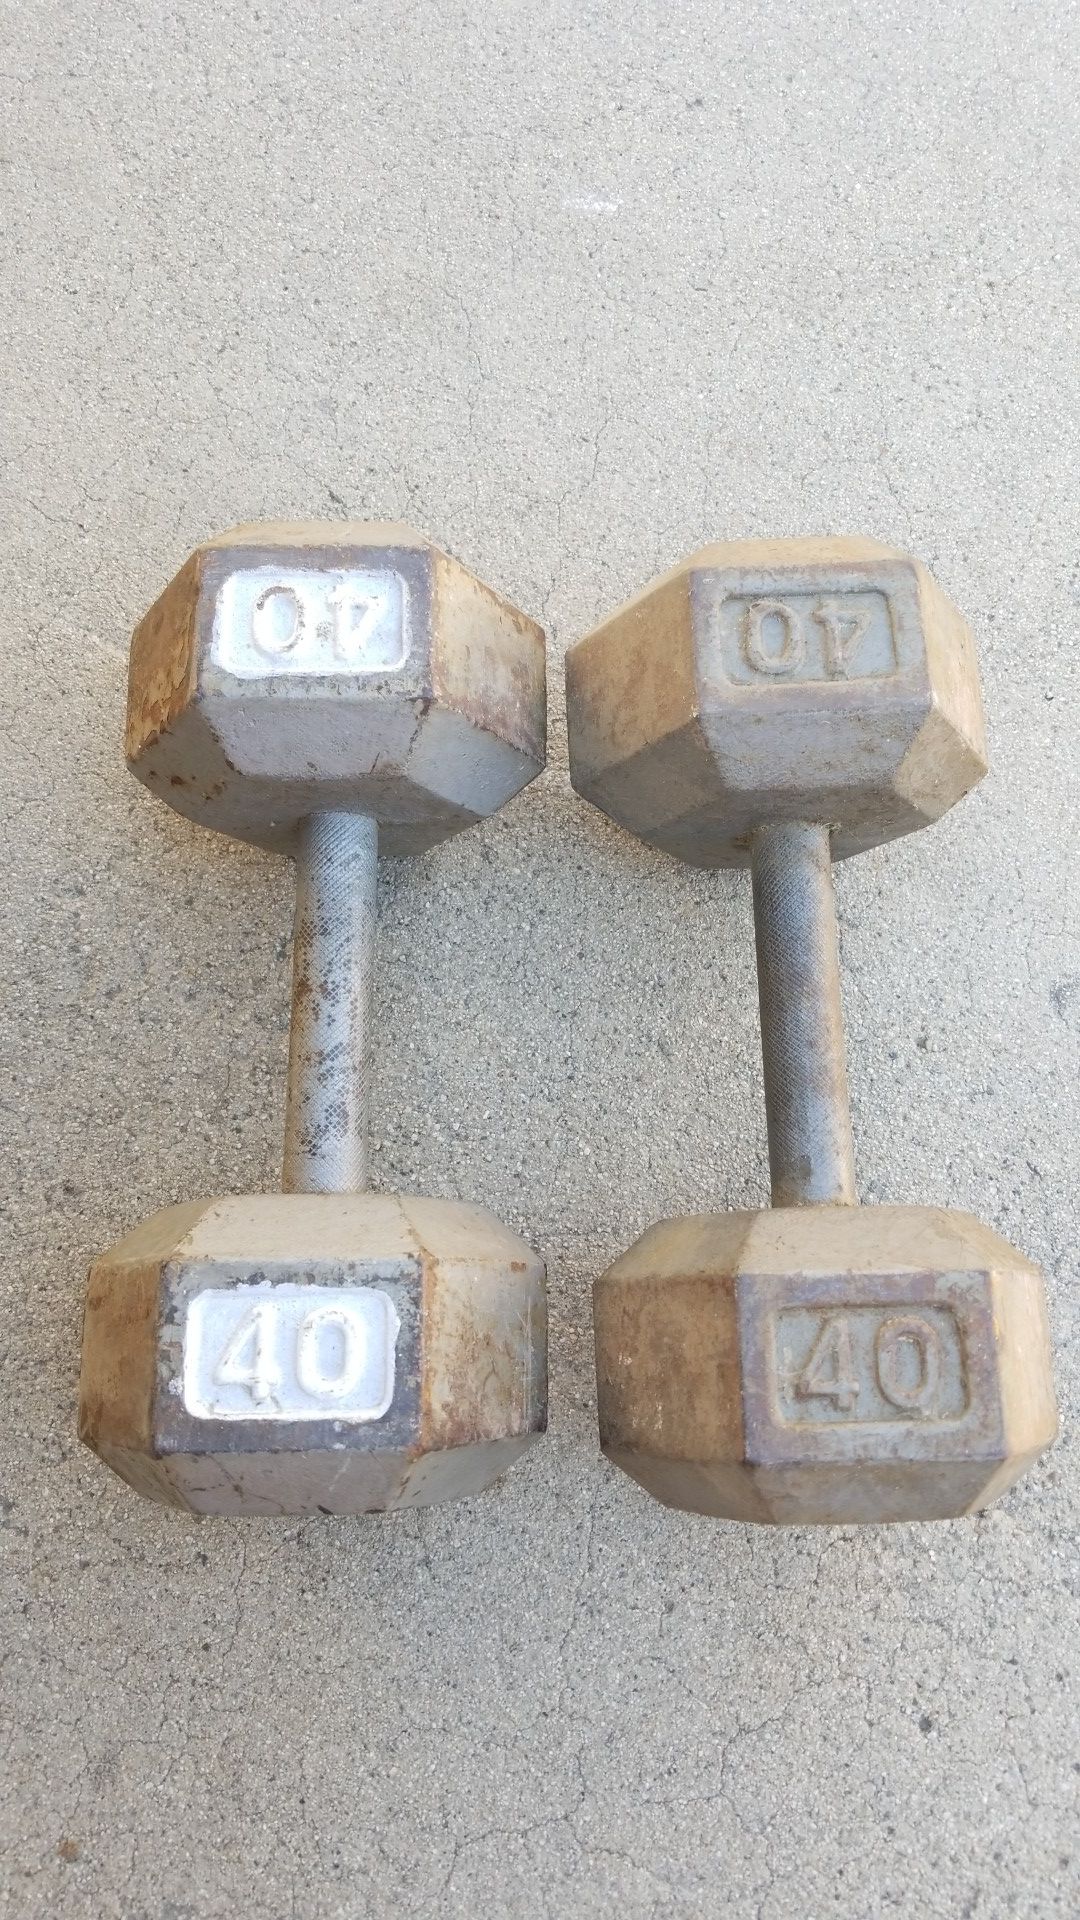 40lb 80lb hex dumbbells. Westminister or Ontario